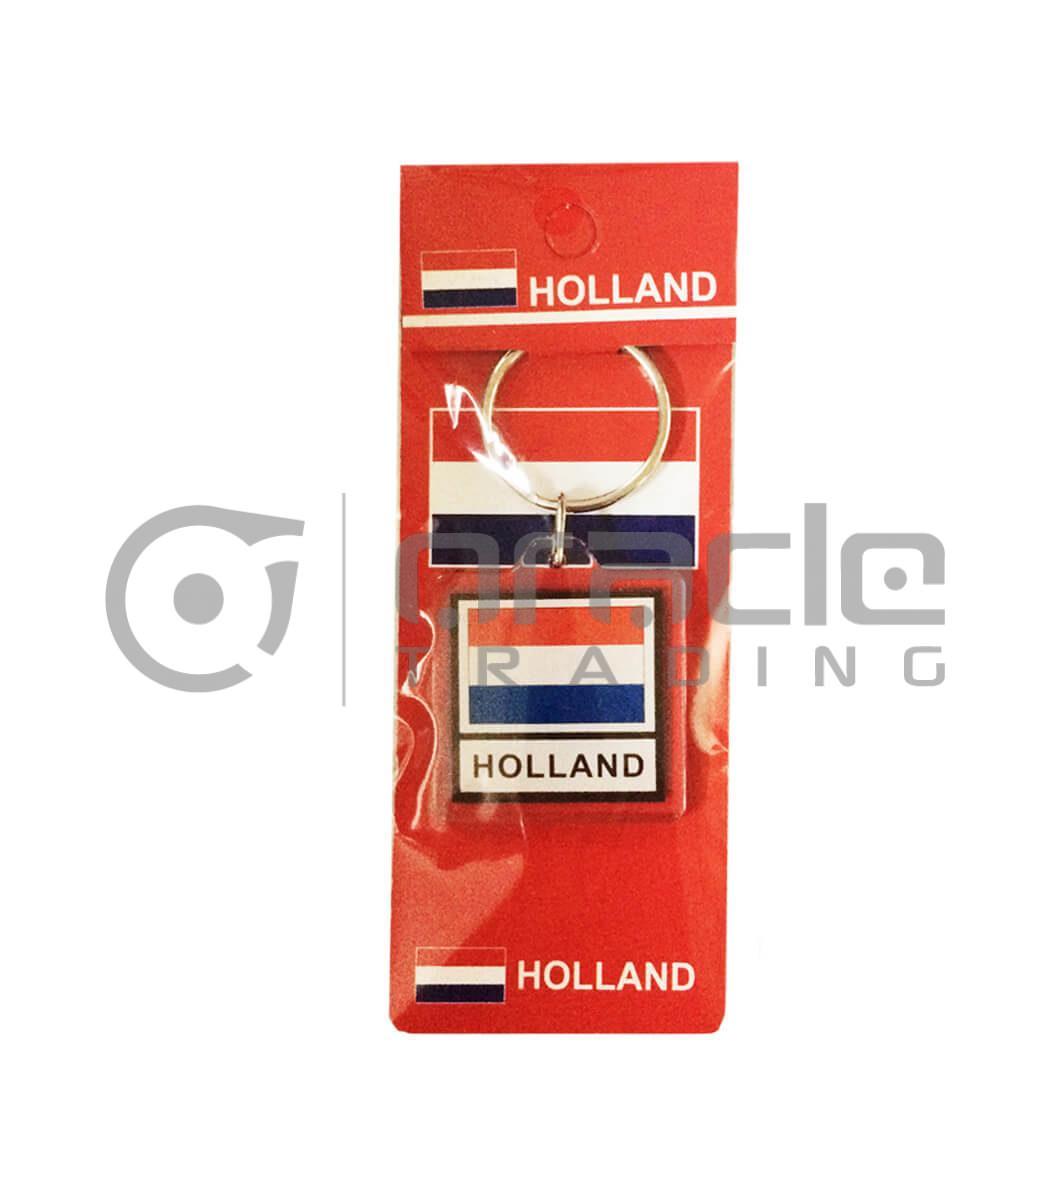 Holland Square Keychain 12-Pack